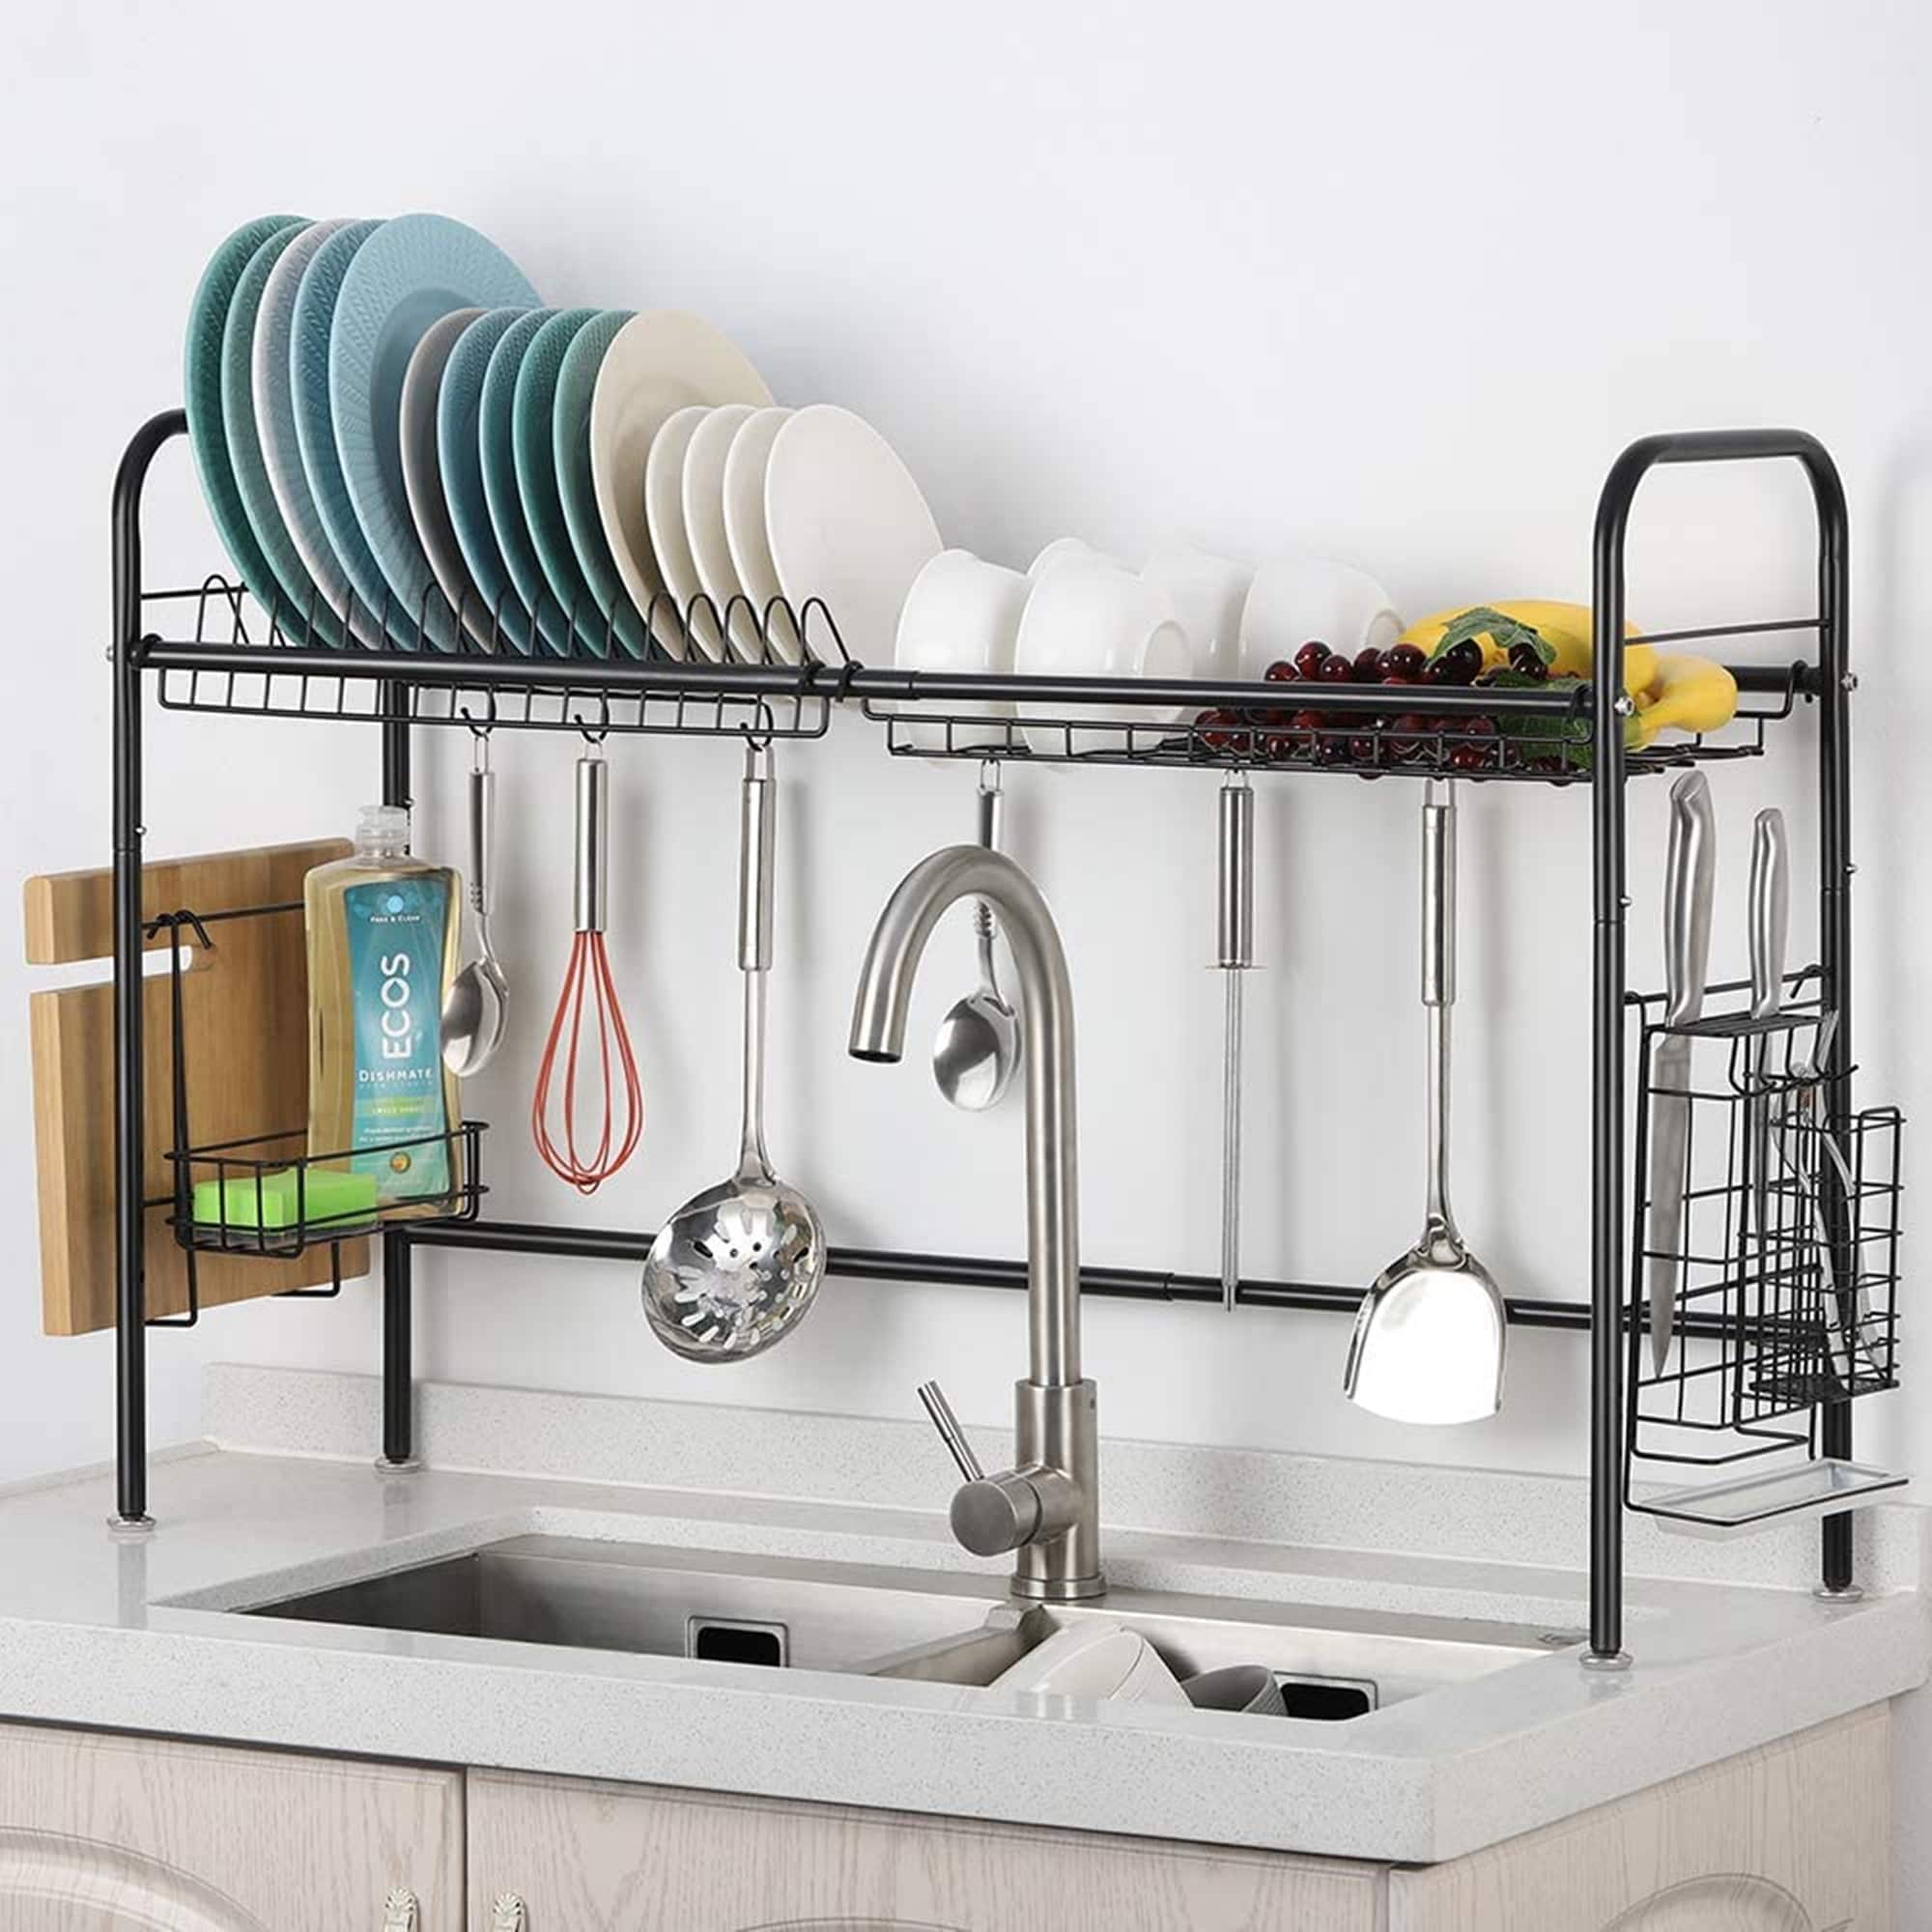 https://ak1.ostkcdn.com/images/products/is/images/direct/3752695d284207c19926fb30010f4f44092d382d/Dish-Drying-Rack-Over-the-Sink-Kitchen-Sink-Organizer%2C-Stainless-Steel.jpg